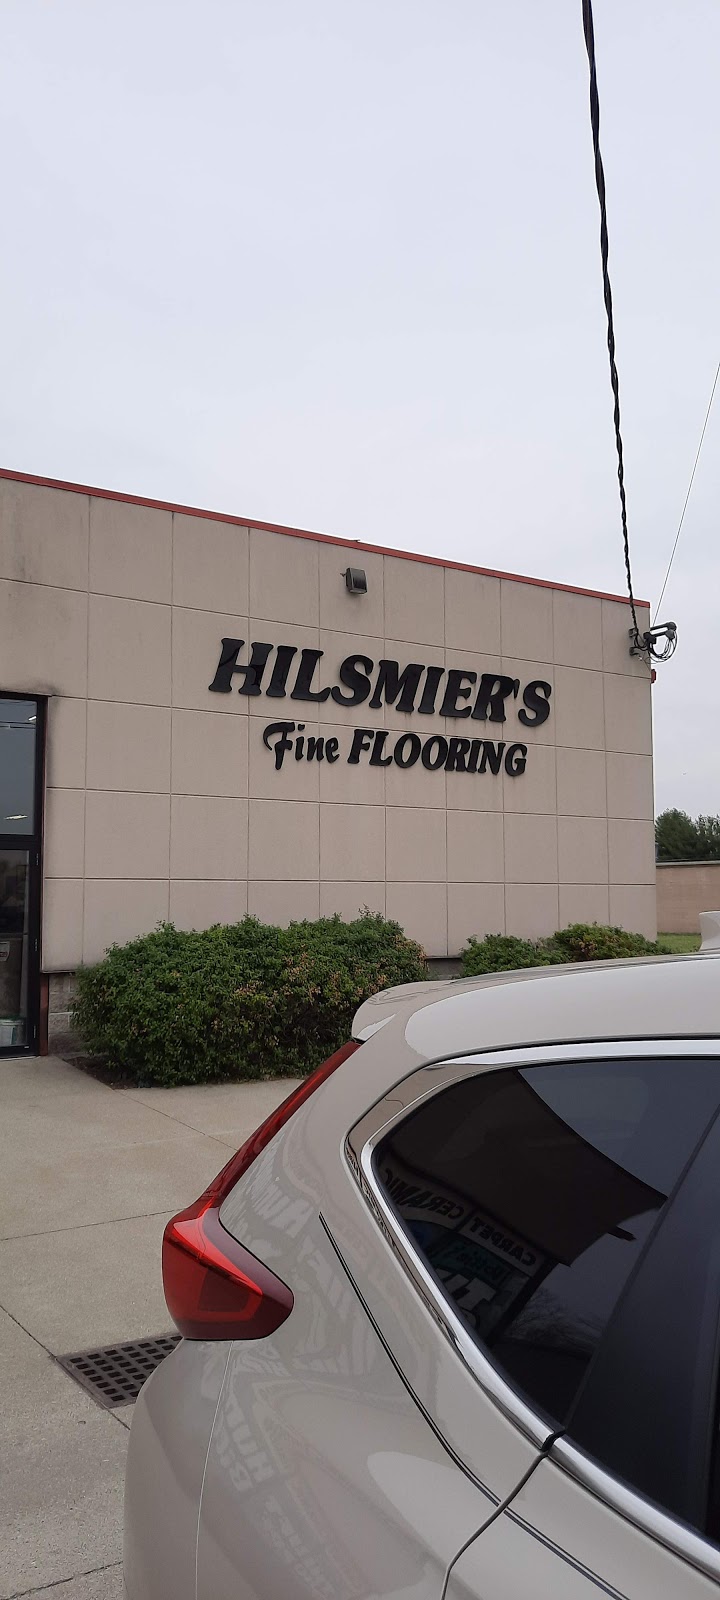 Humongous Bills Carpet Outlet | 4053 Dixie Hwy, Fairfield, OH 45014 | Phone: (513) 868-3445